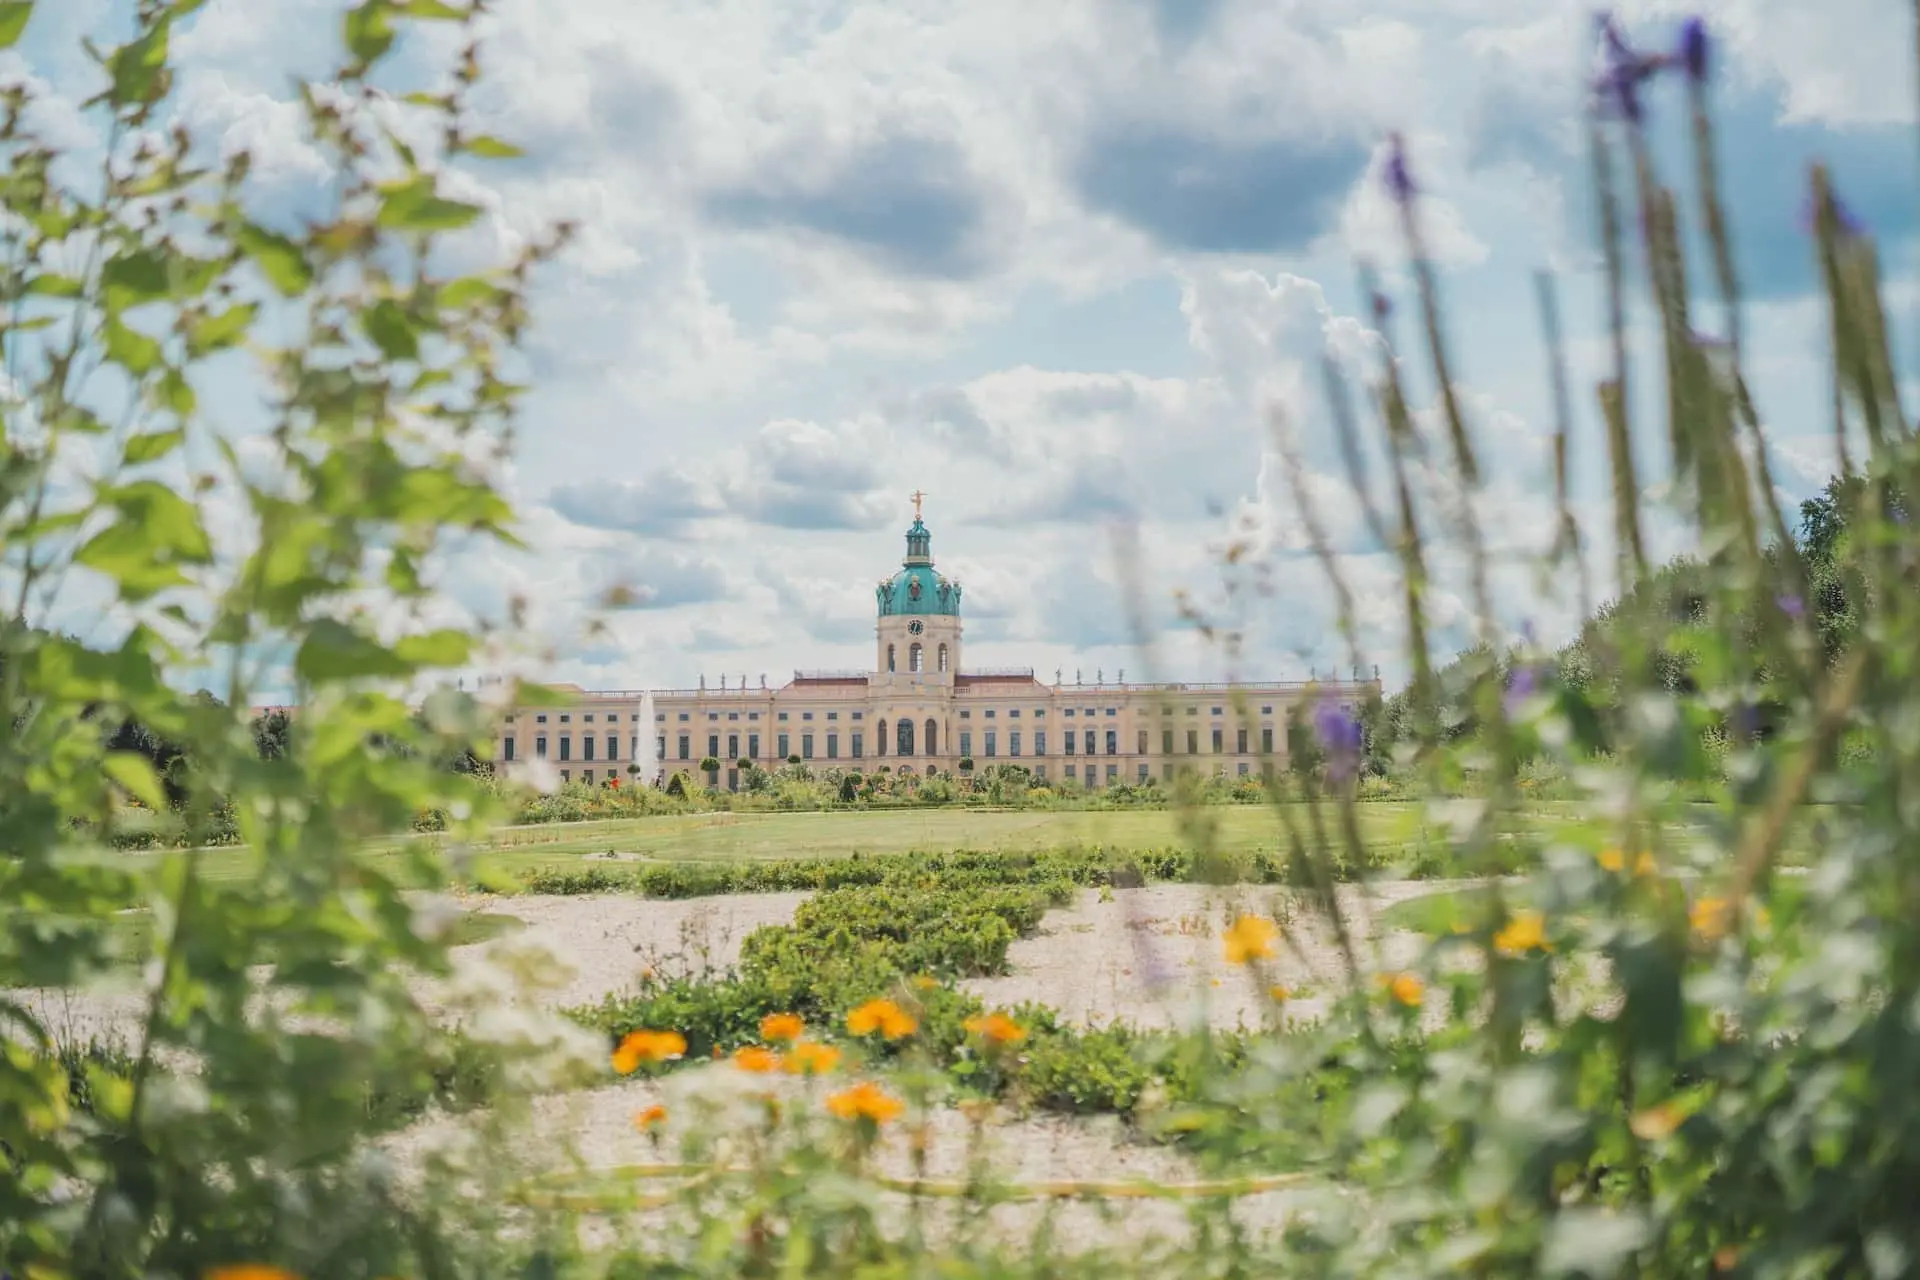 The magnificent Charlottenburg Palace.